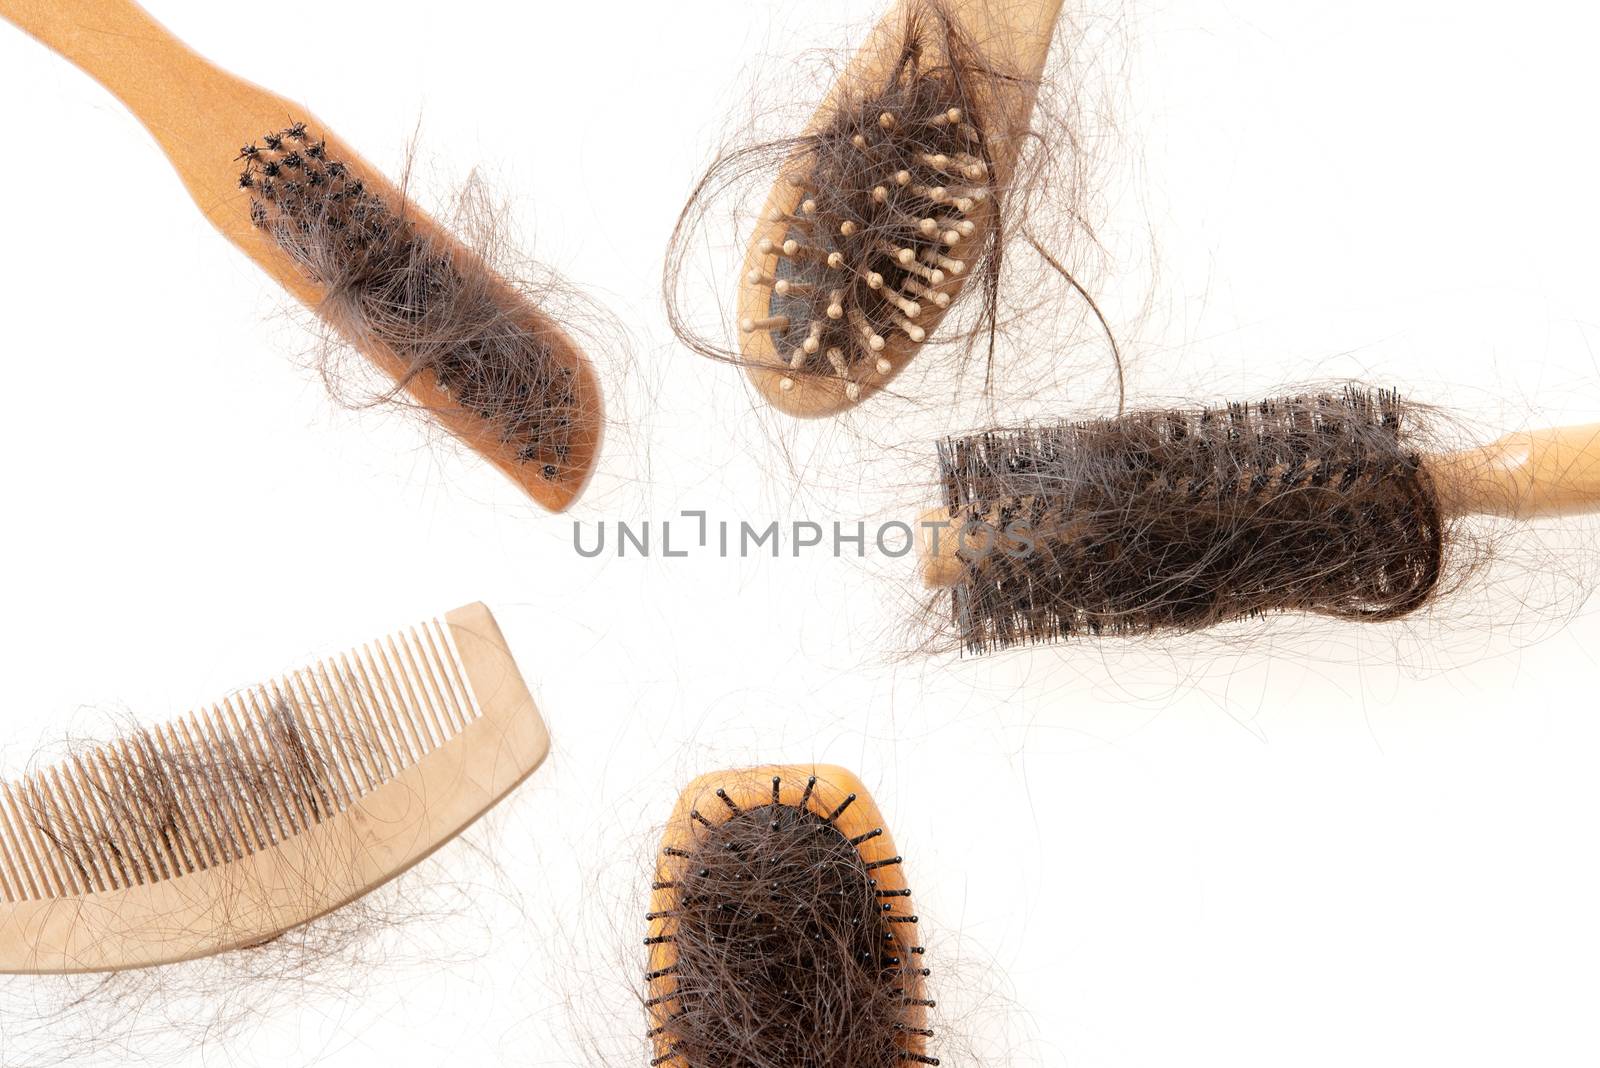 Collection set of brushes with lost hair on it, isolated on white background.